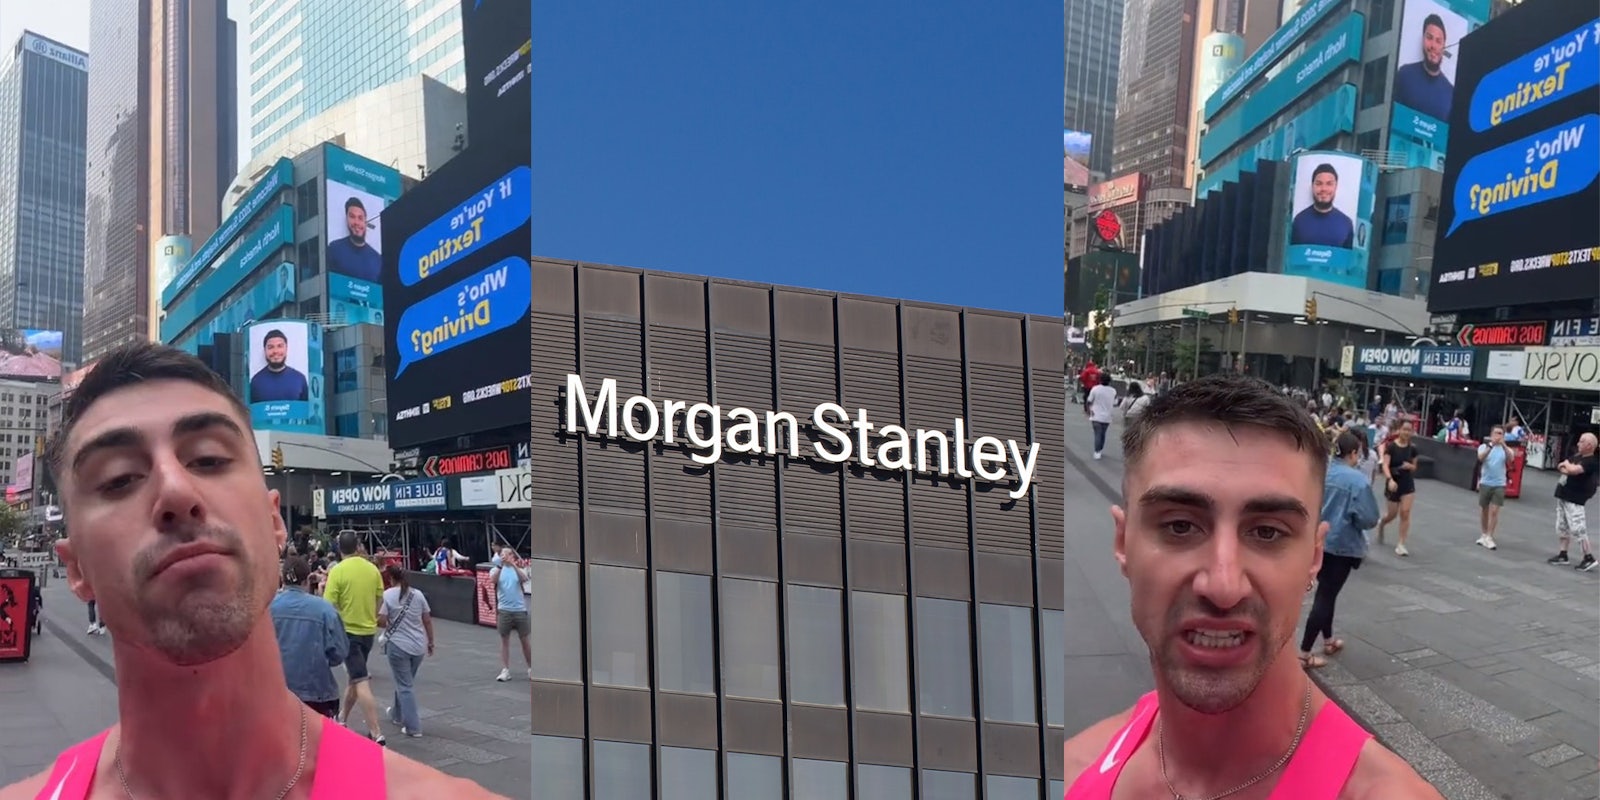 Morgan Stanley Logo on Building; Man in pink tank top in new York times square